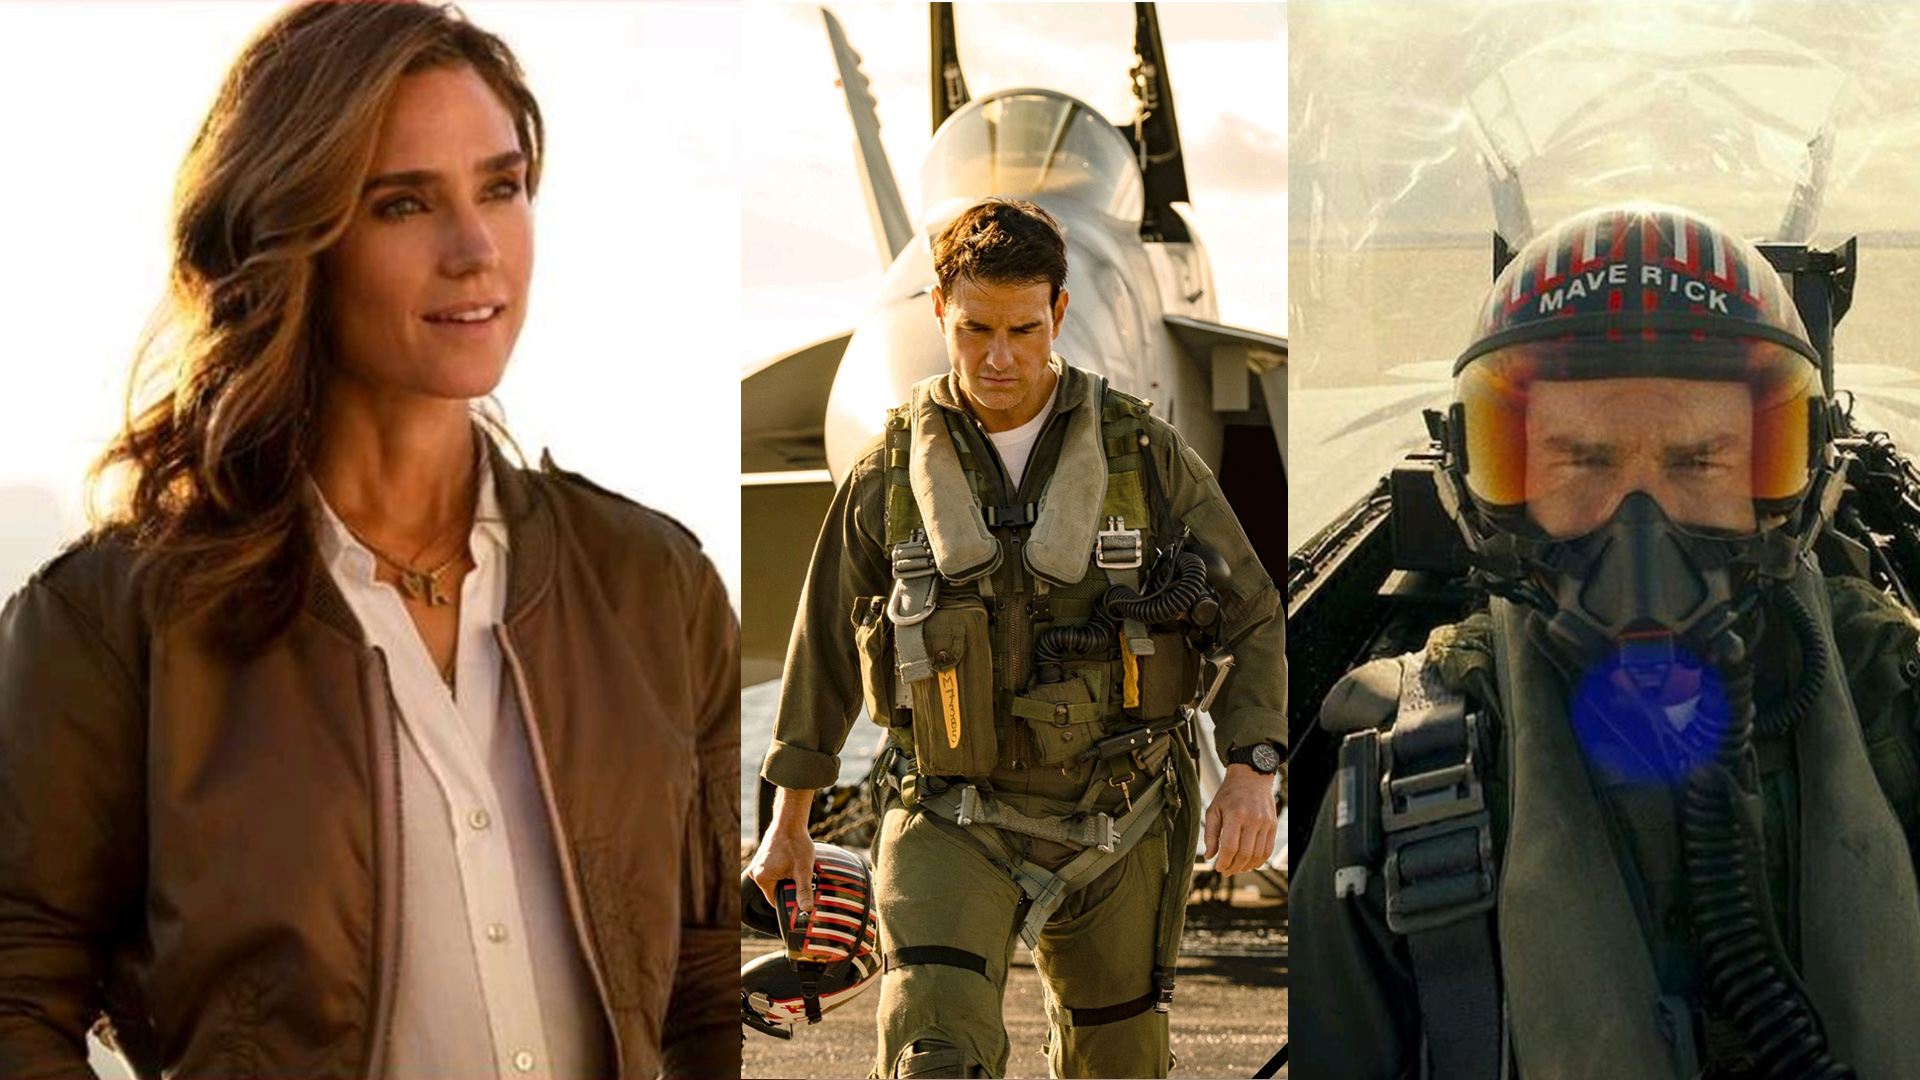 Top Gun: Maverick image offer new looks at Jennifer Connelly, Tom Cruise & more